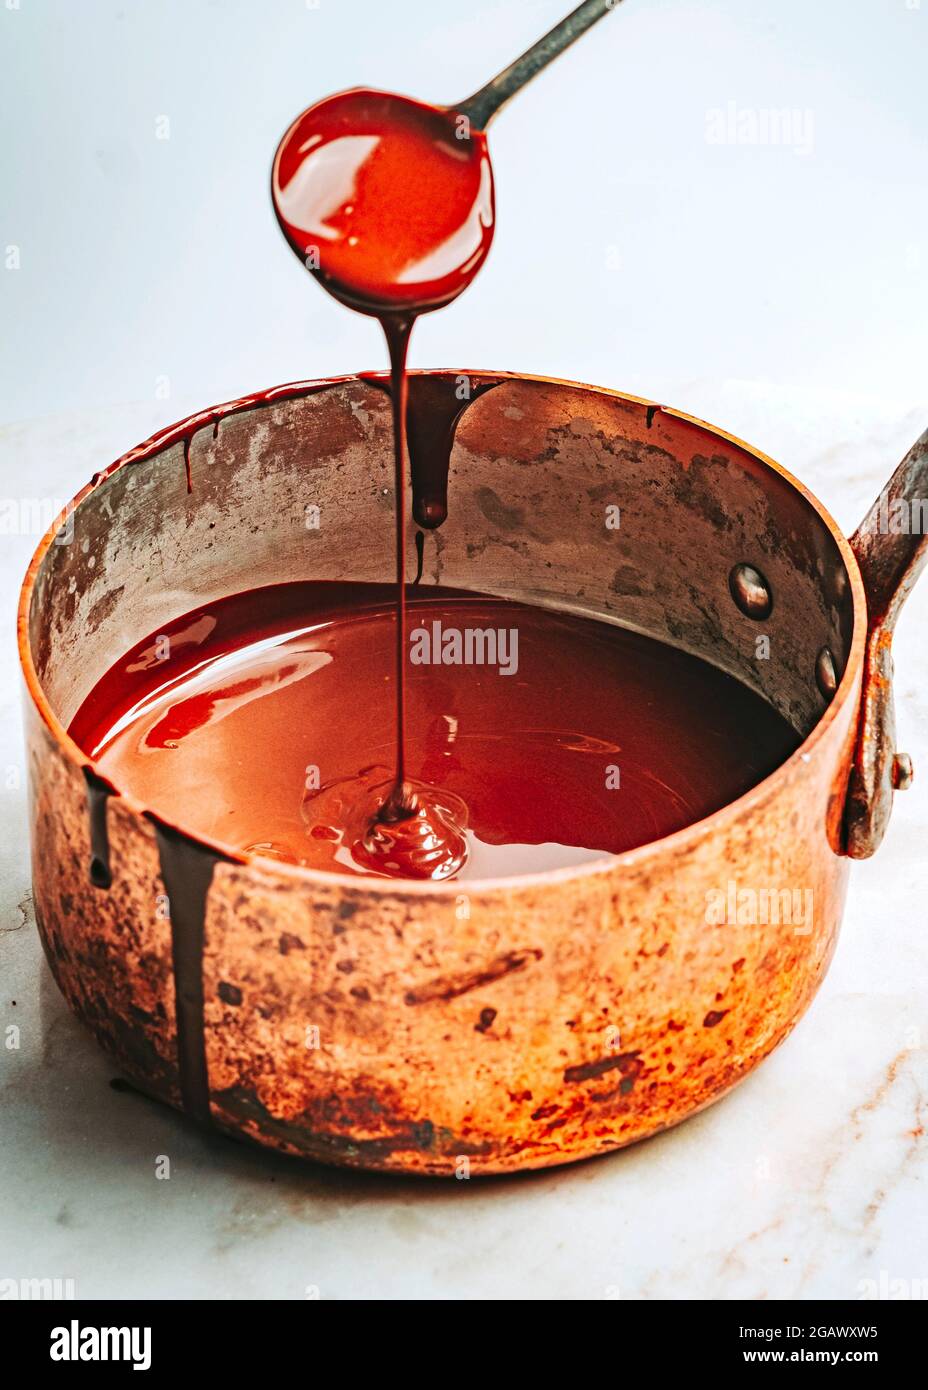 Melting Chocolate in Copper Saucepan Stock Photo